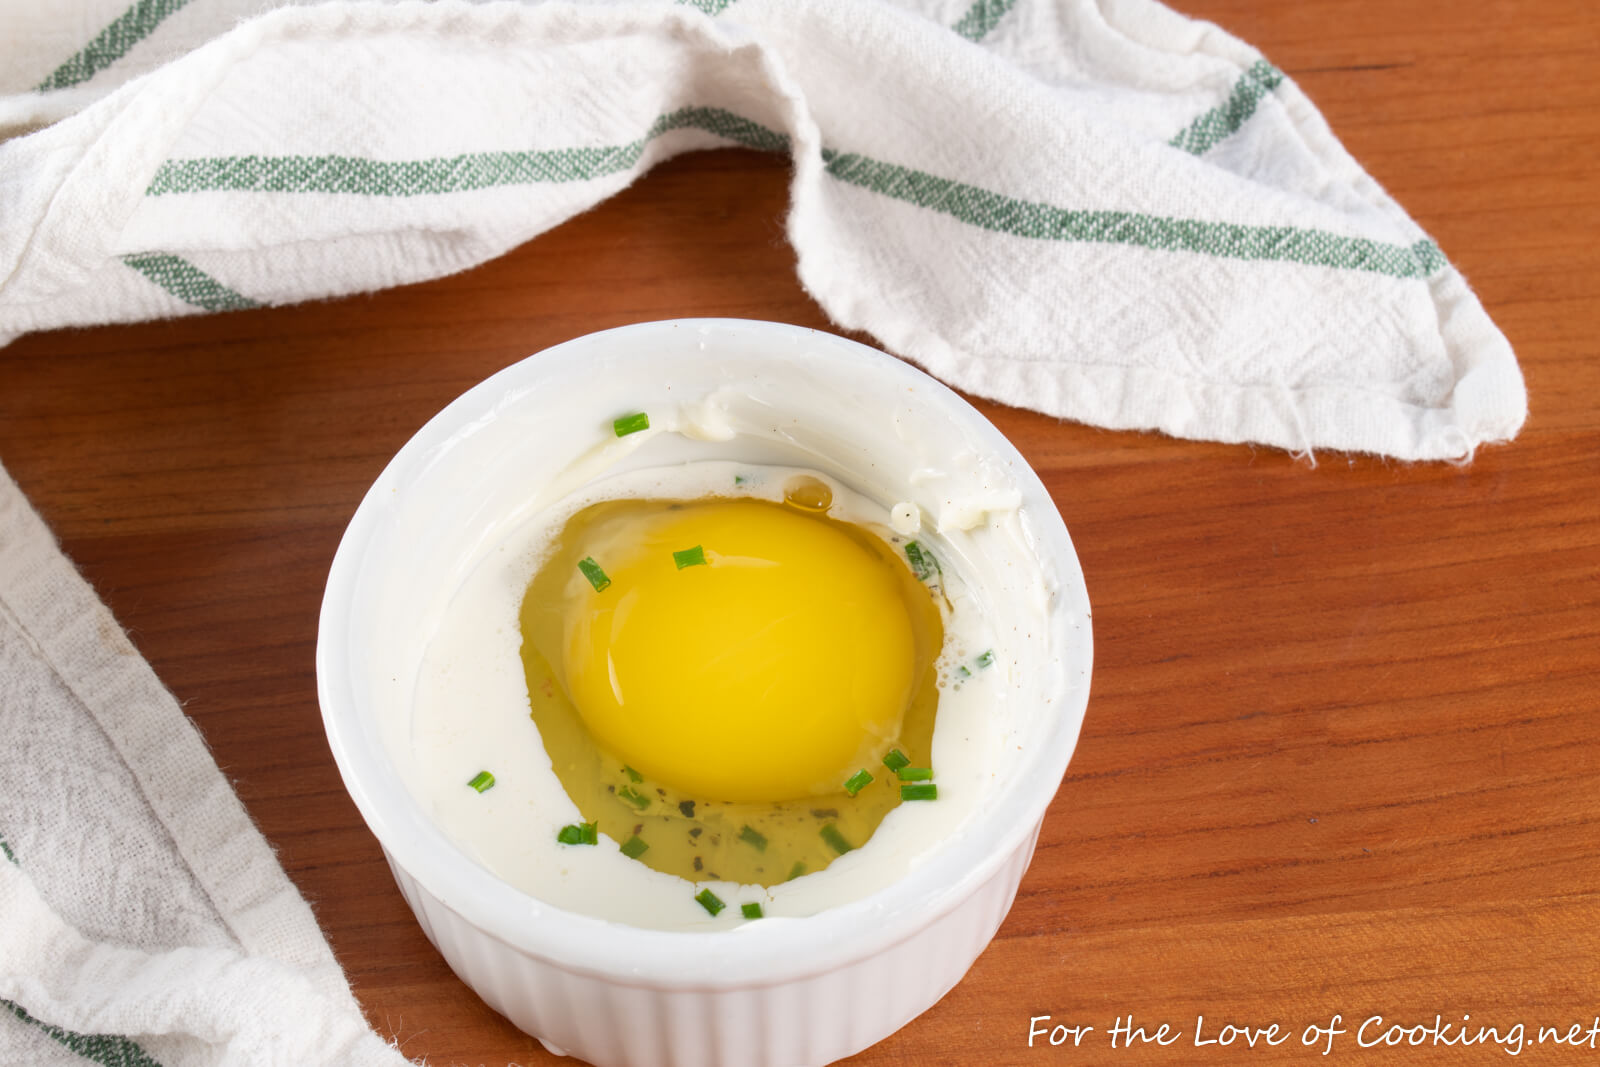 Coddled Eggs-An Eggcellent Way to Start Your Morning - The Teacup